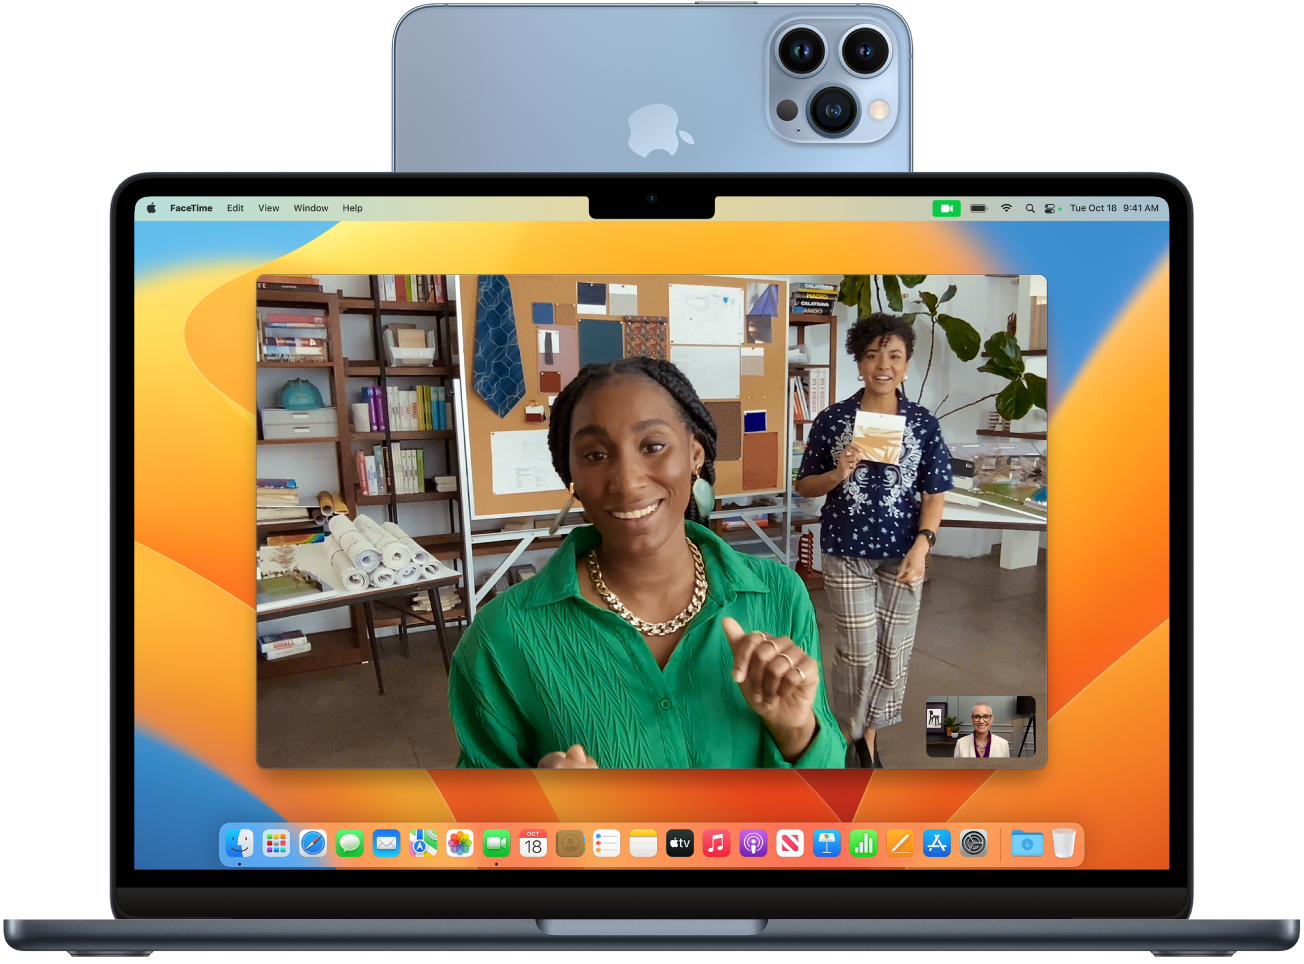 A Mac with an iPhone that’s being used as a webcam mounted at the top of the display. The image from the iPhone camera is visible on the display of the Mac.